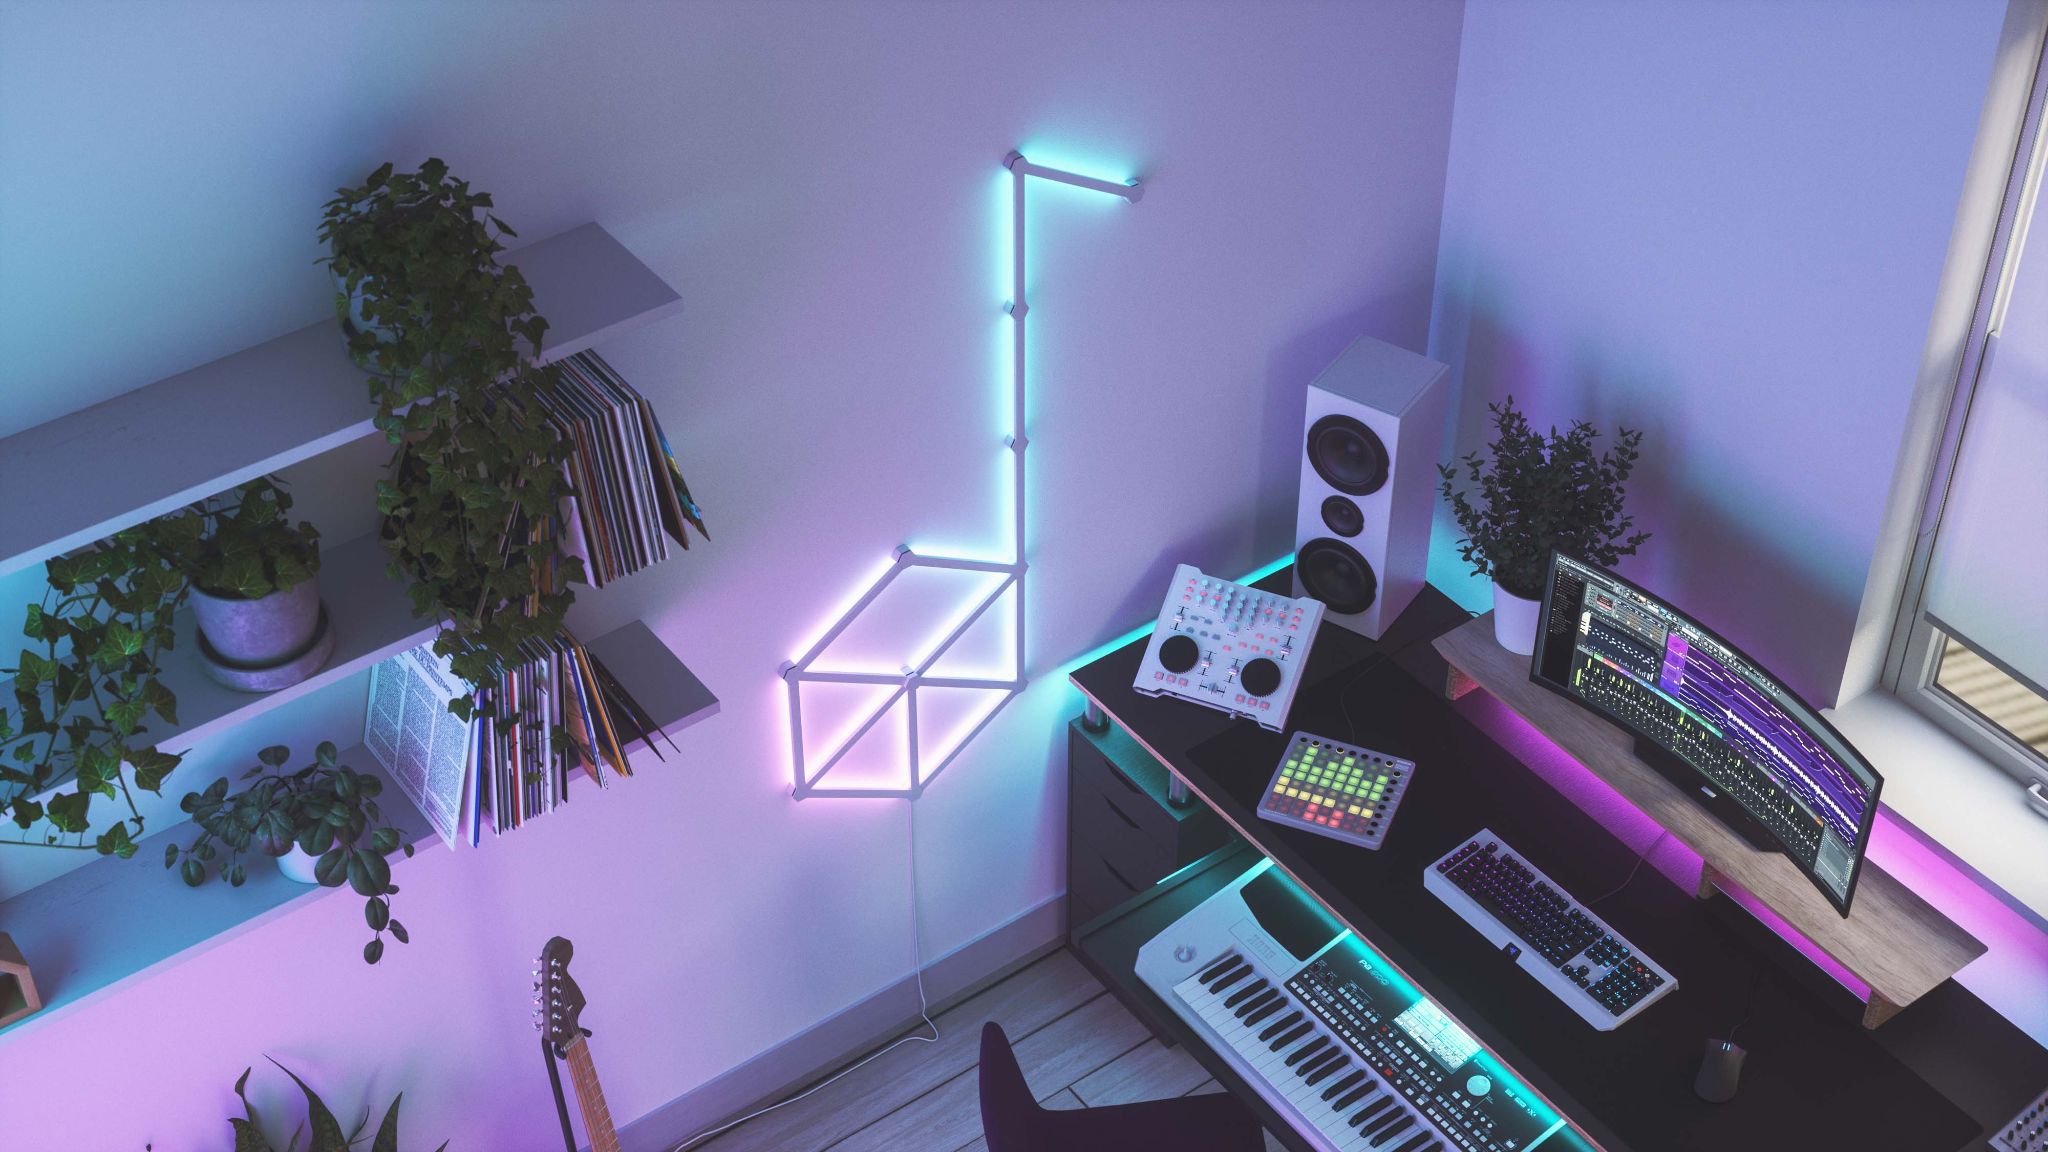 Lines Rhythm Music Visualizer feature in a music studio with smart LED light lines in a music note design.